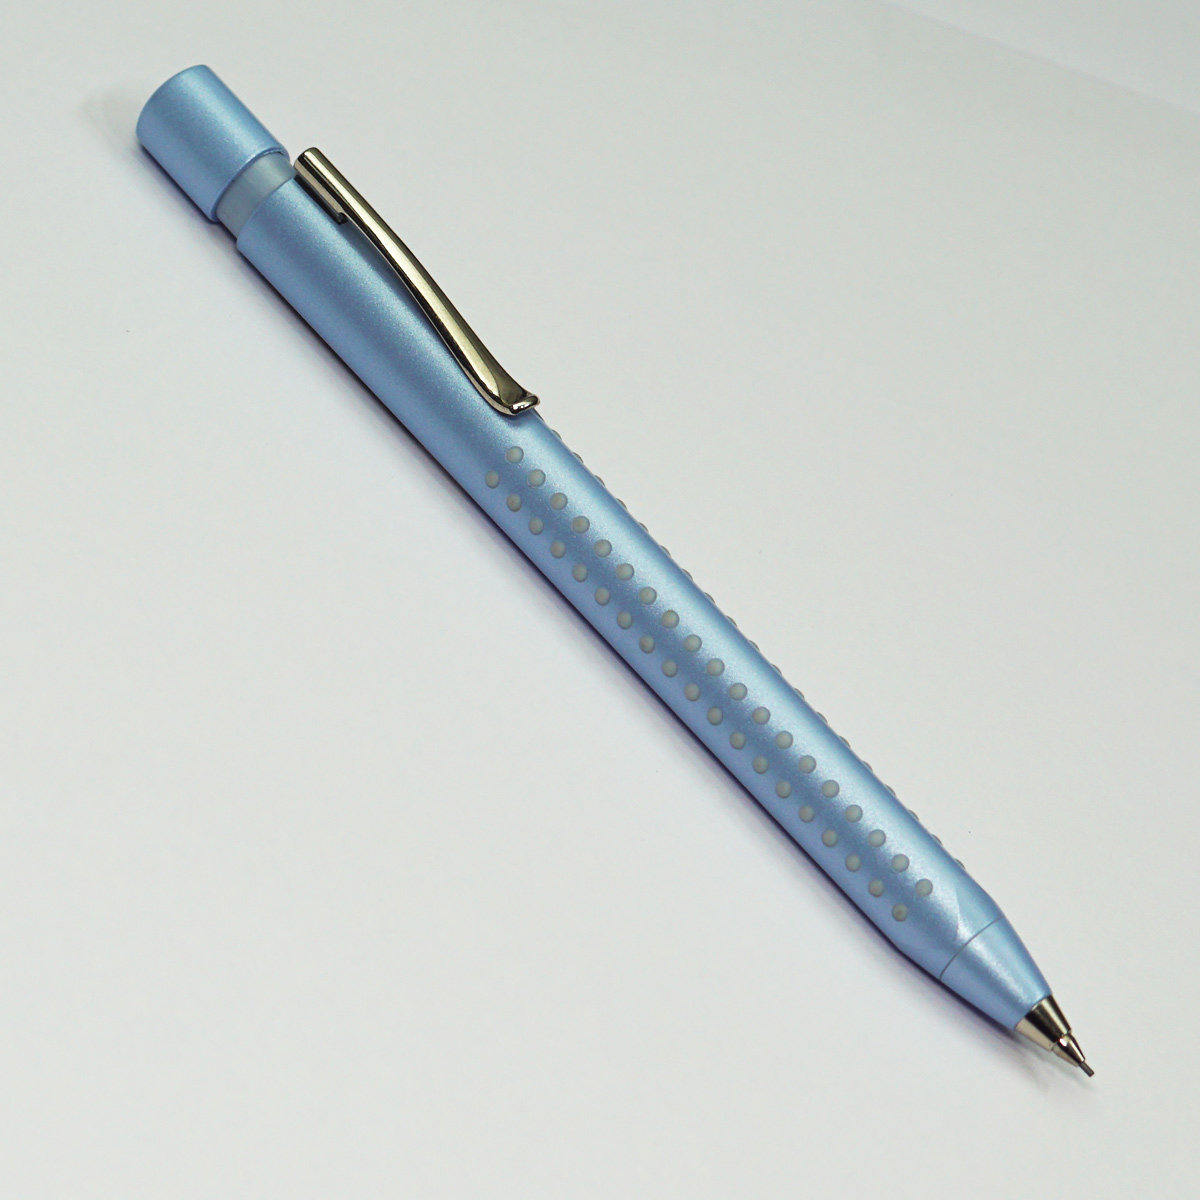 Faber Castell Frosted Light Blue Color Body With Silver Clip 0.7mm Tip Mechanical Pencil SKU 23032